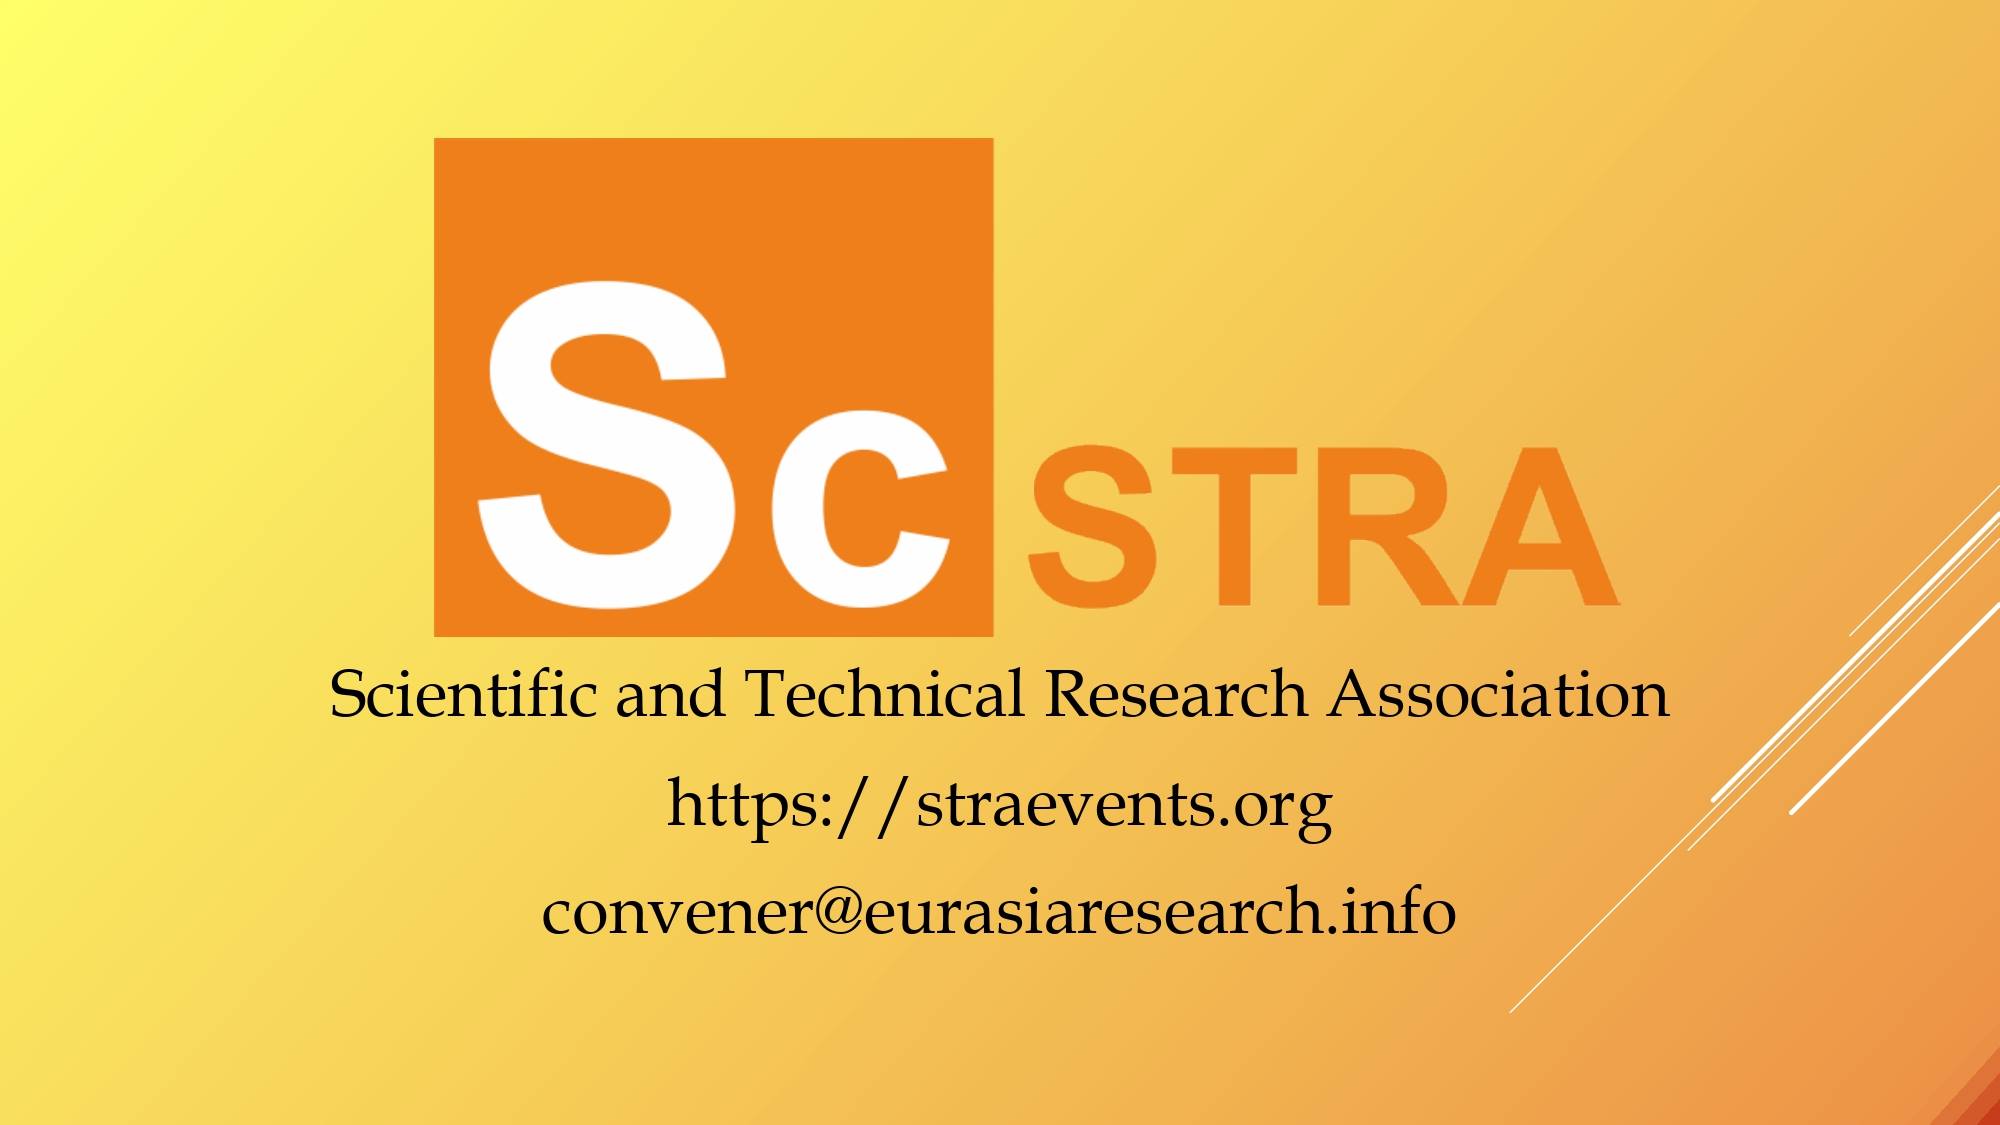 ICSTR Paris – International Conference on Science & Technology Research, 24-25 March 2022